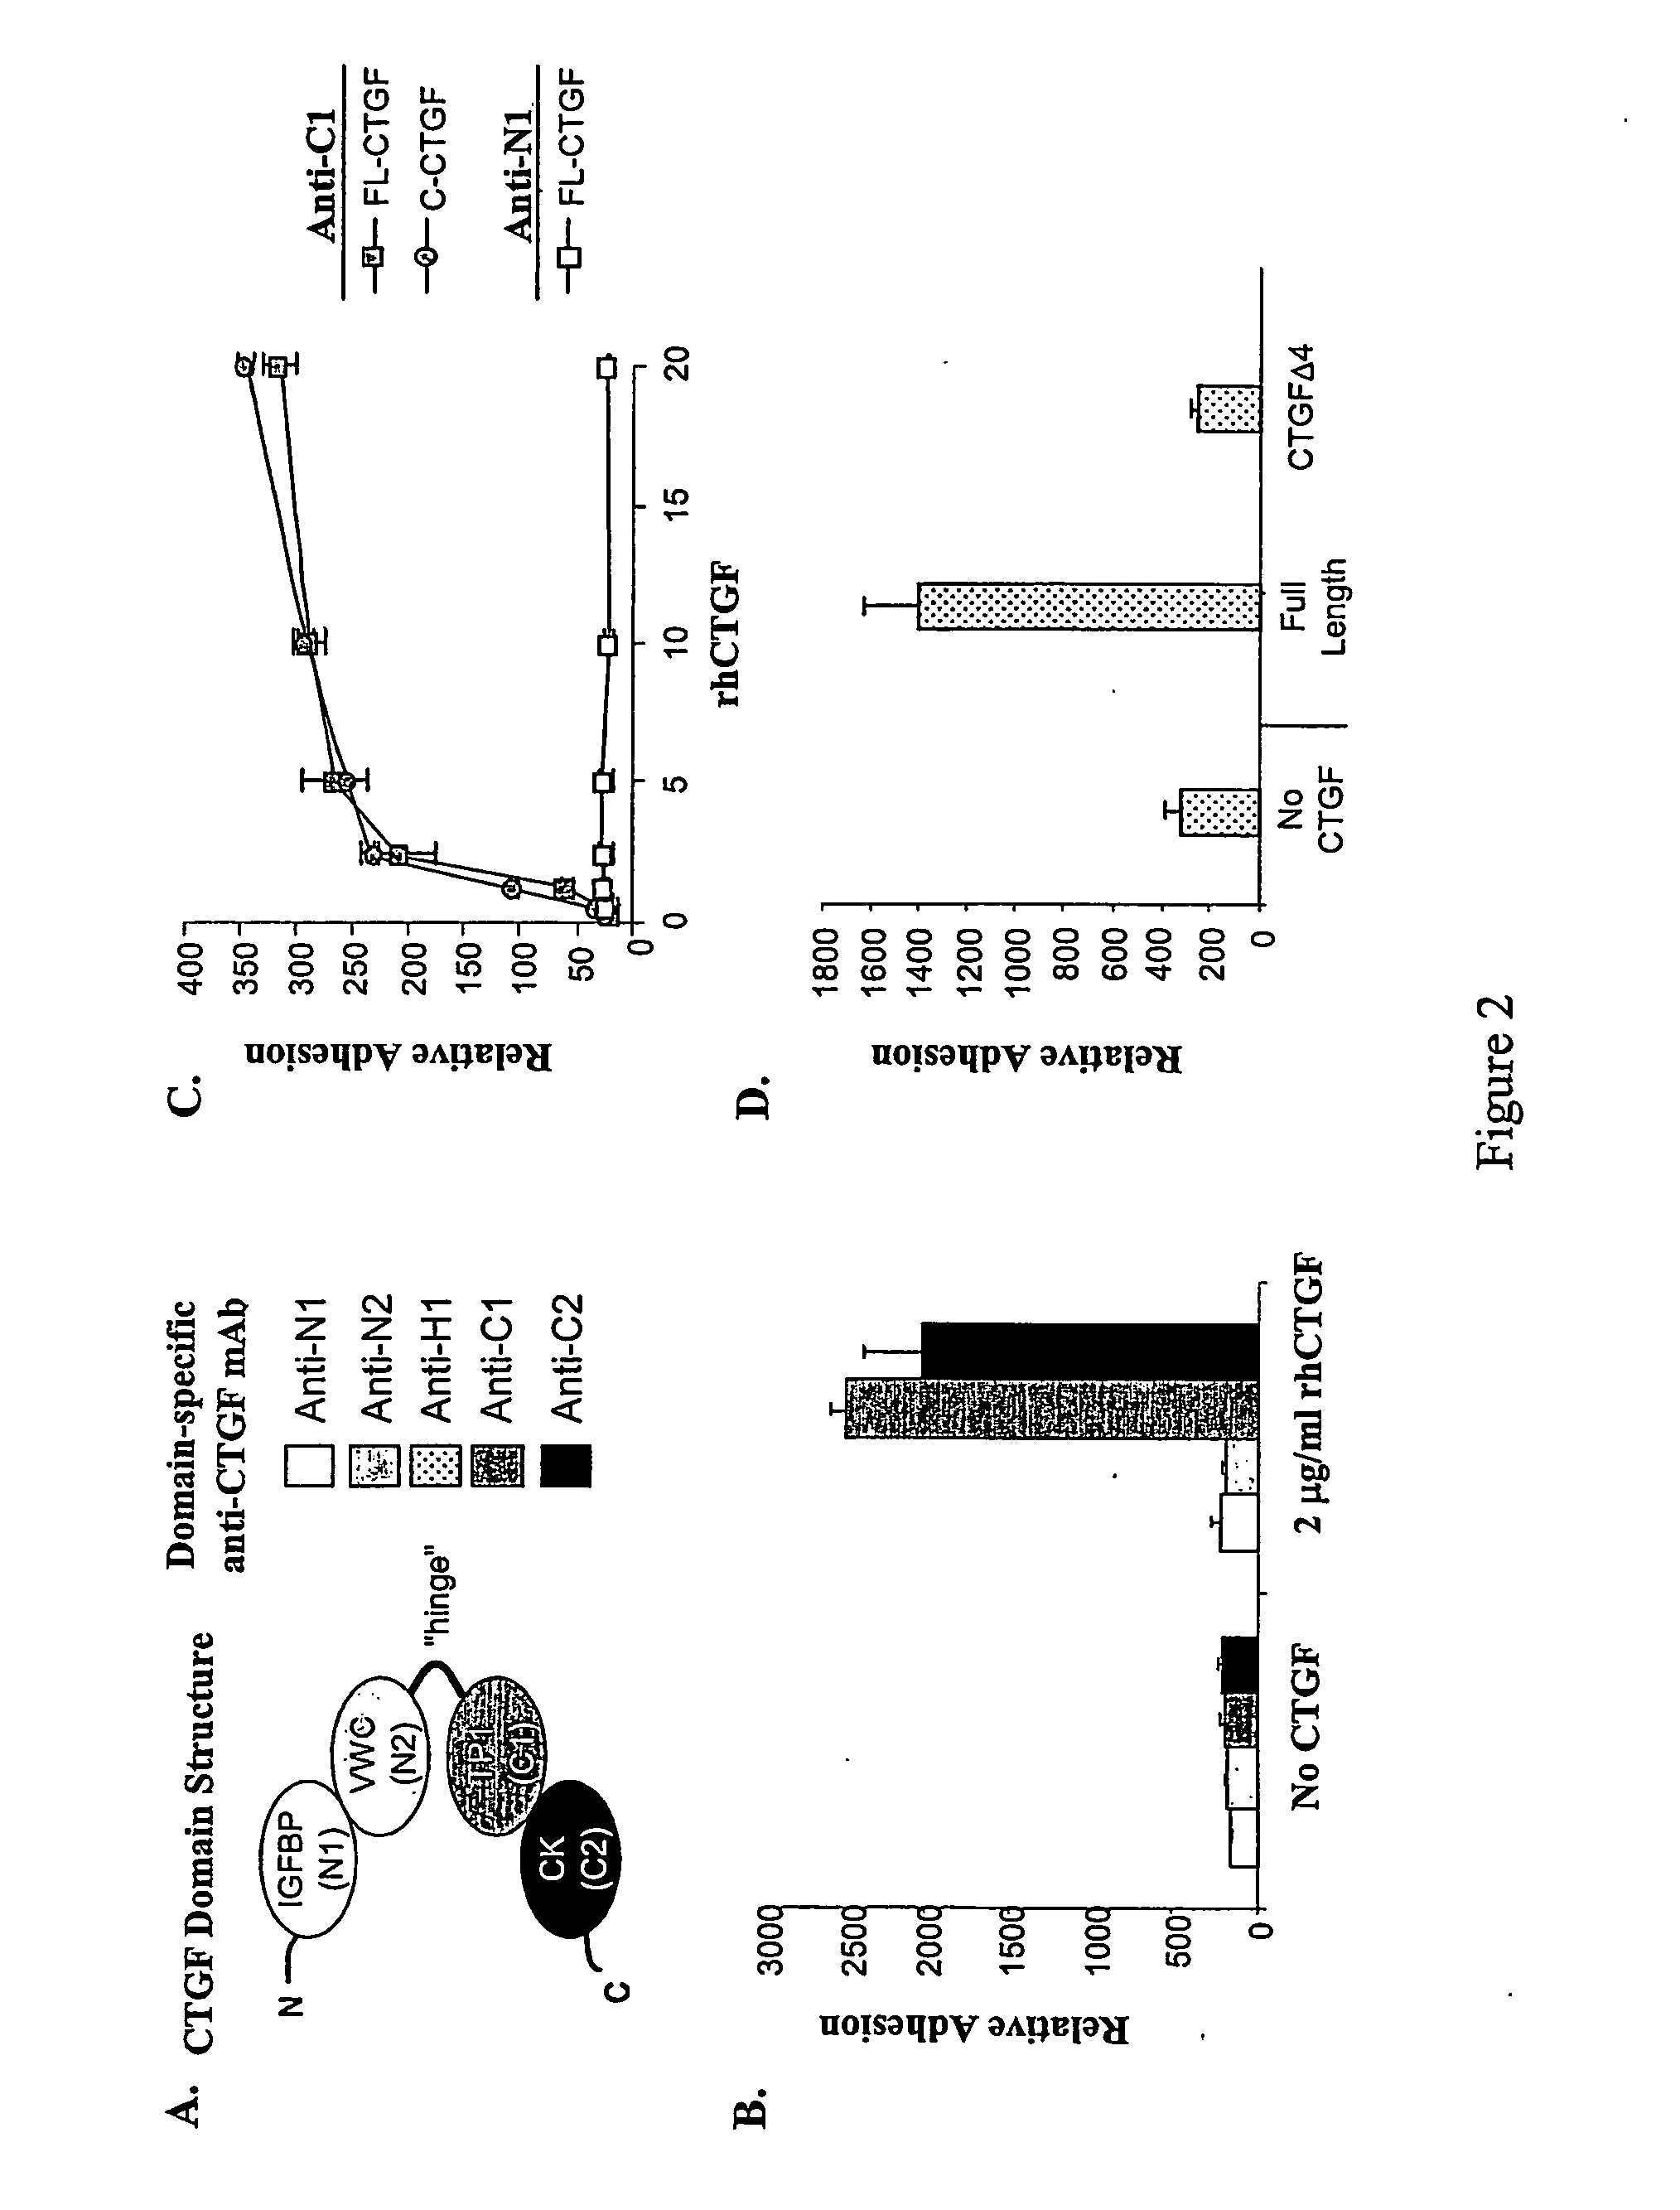 Connective Tissue Growth Factor Signaling